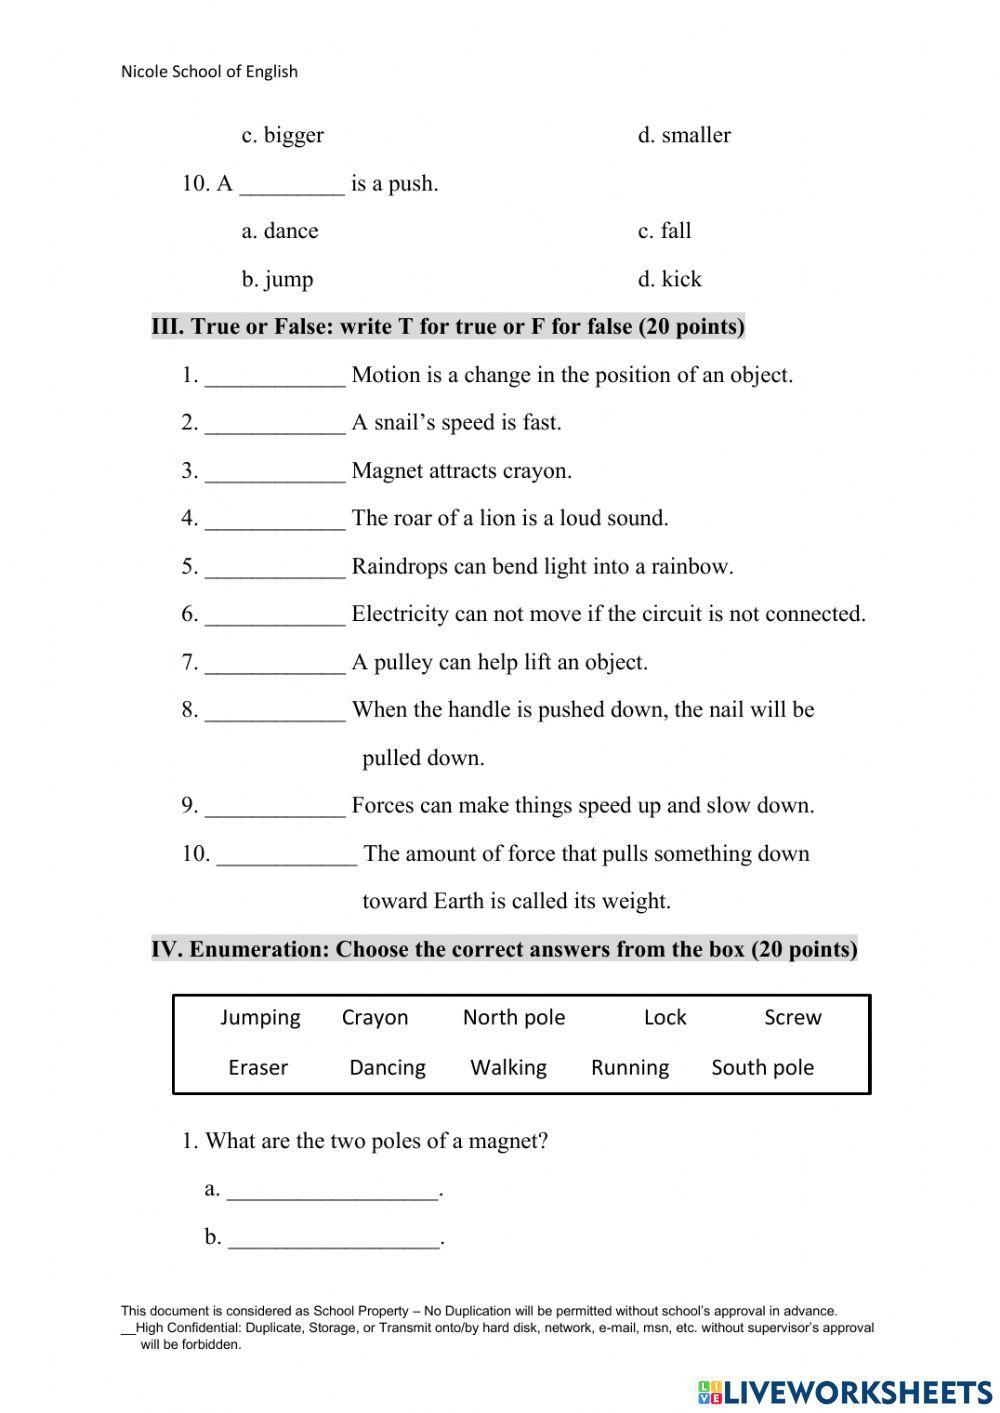 Final Evaluation Science sheet